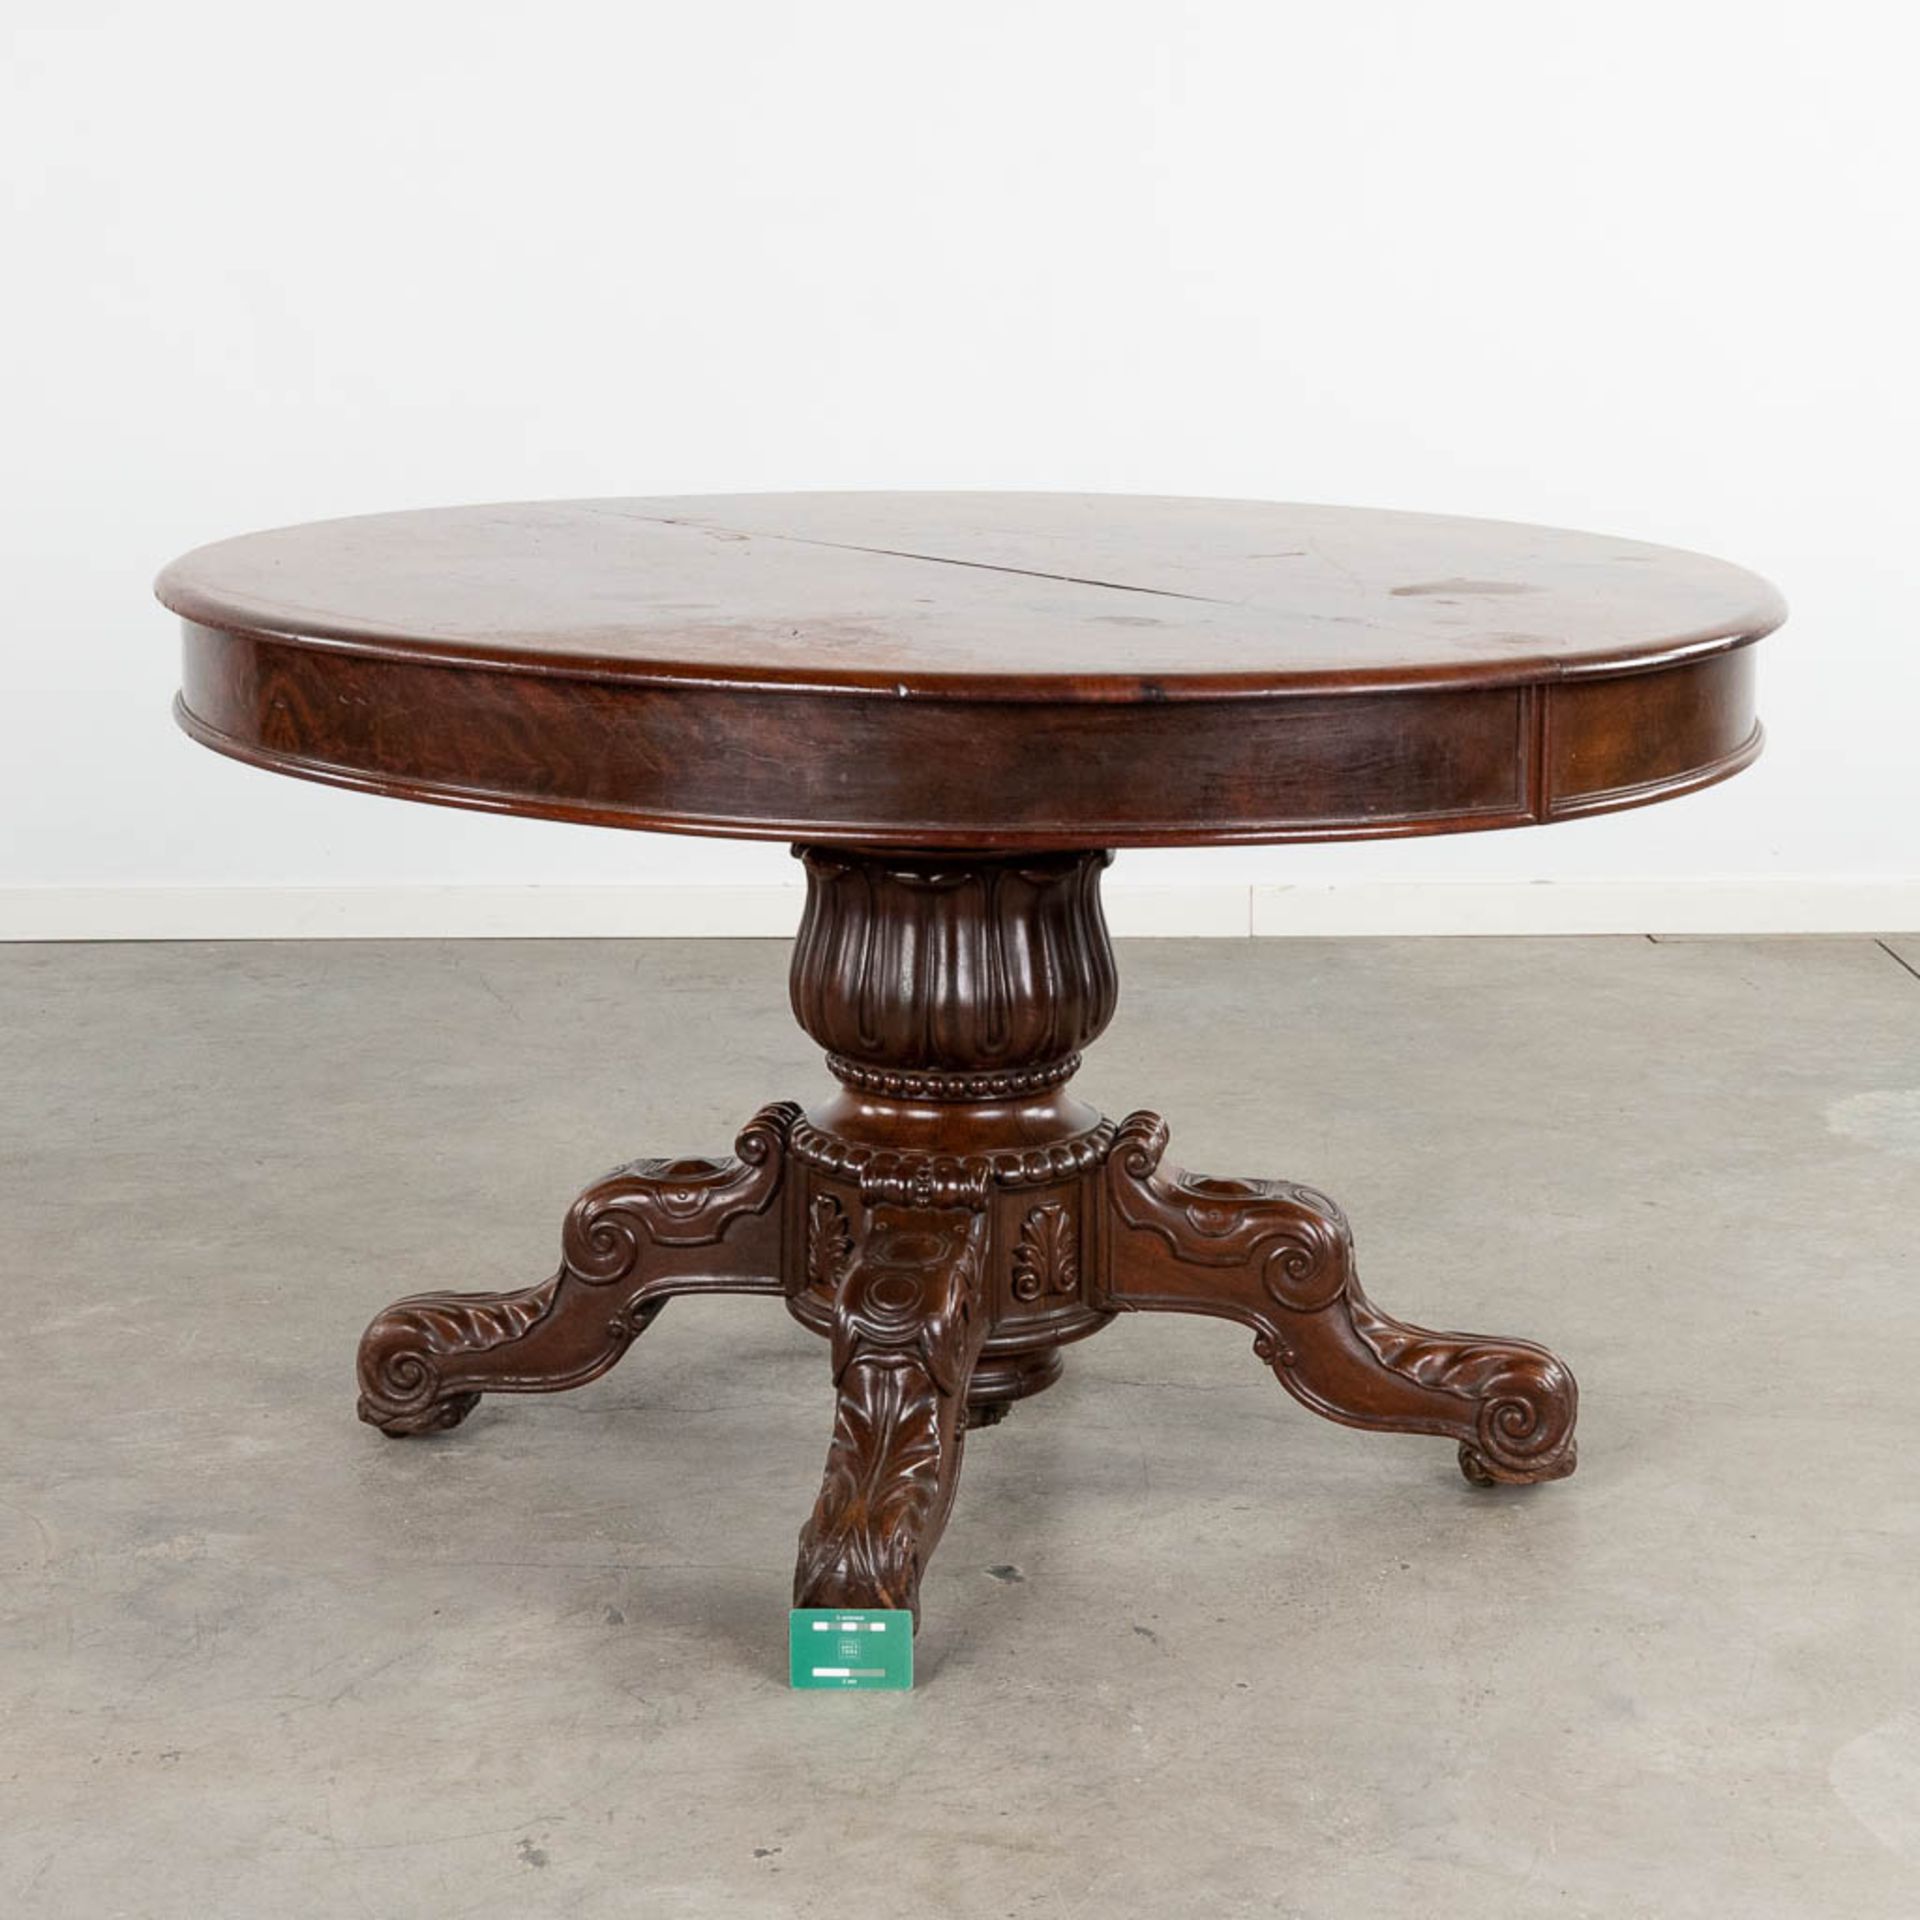 An atique oval table, Lous Philippe. (D:120 x W:139 x H:74 cm) - Image 2 of 9